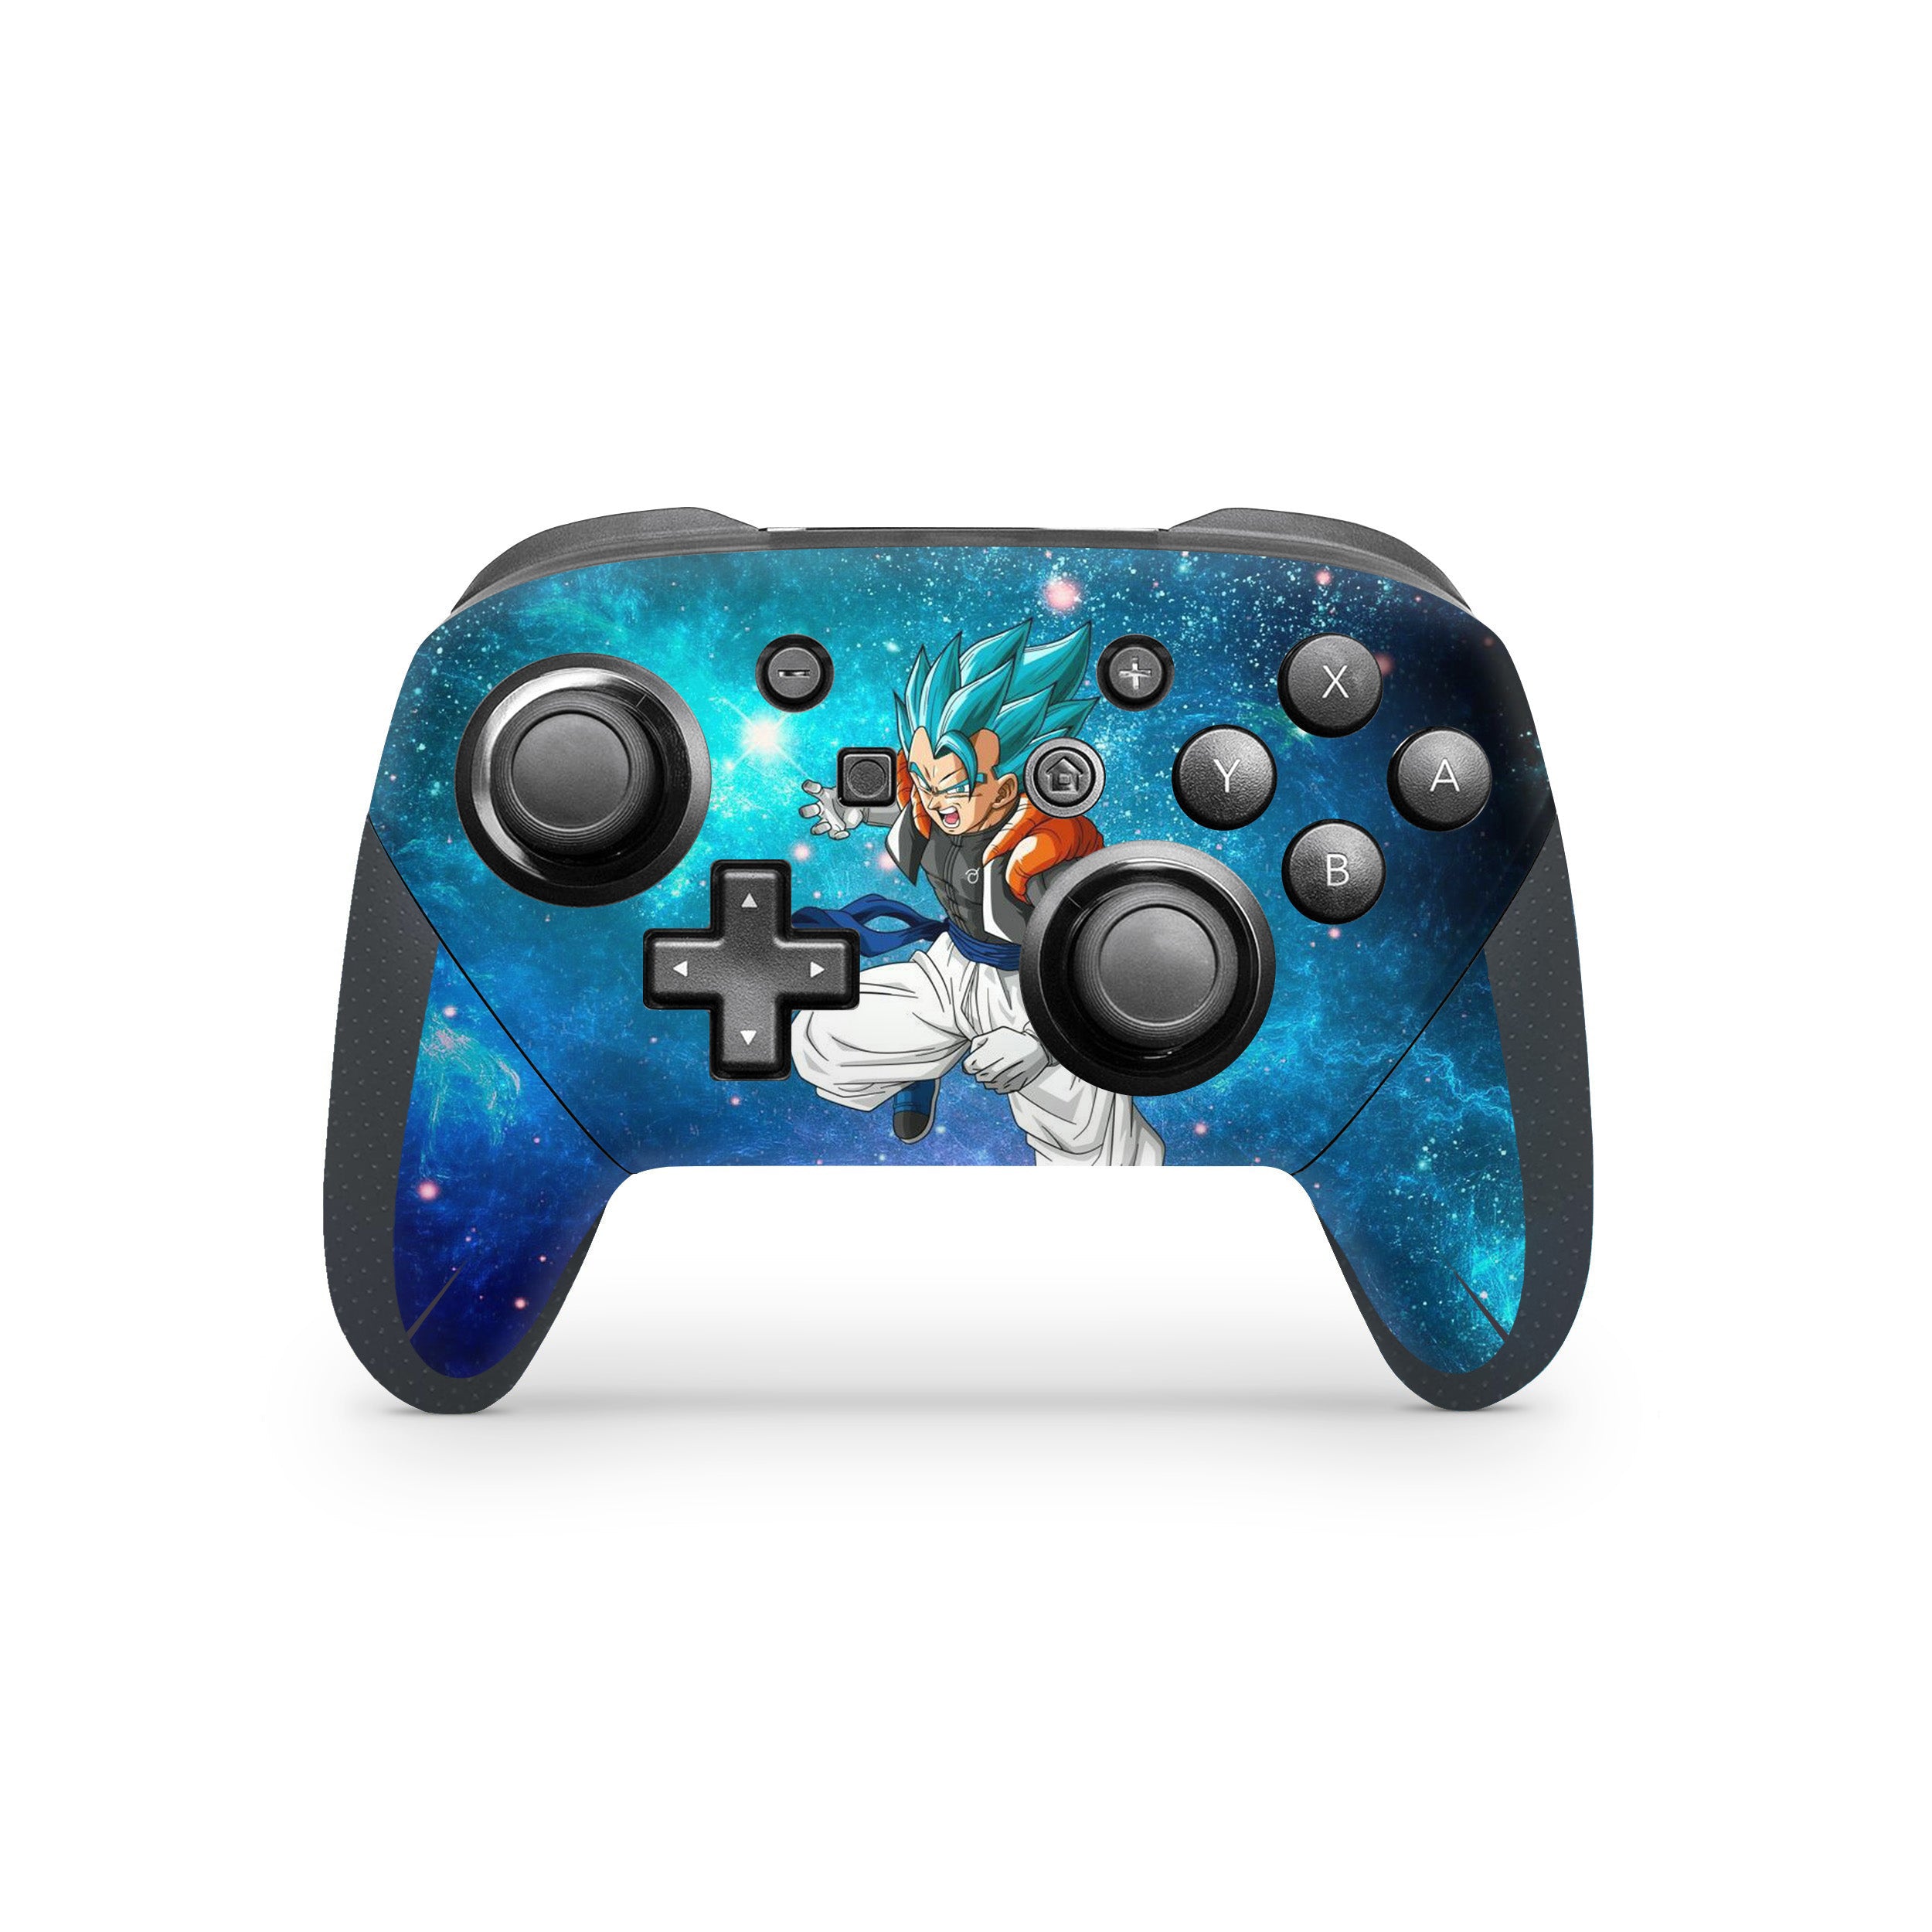 A video game skin featuring a Dragon Ball Super Gogeta design for the Switch Pro Controller.